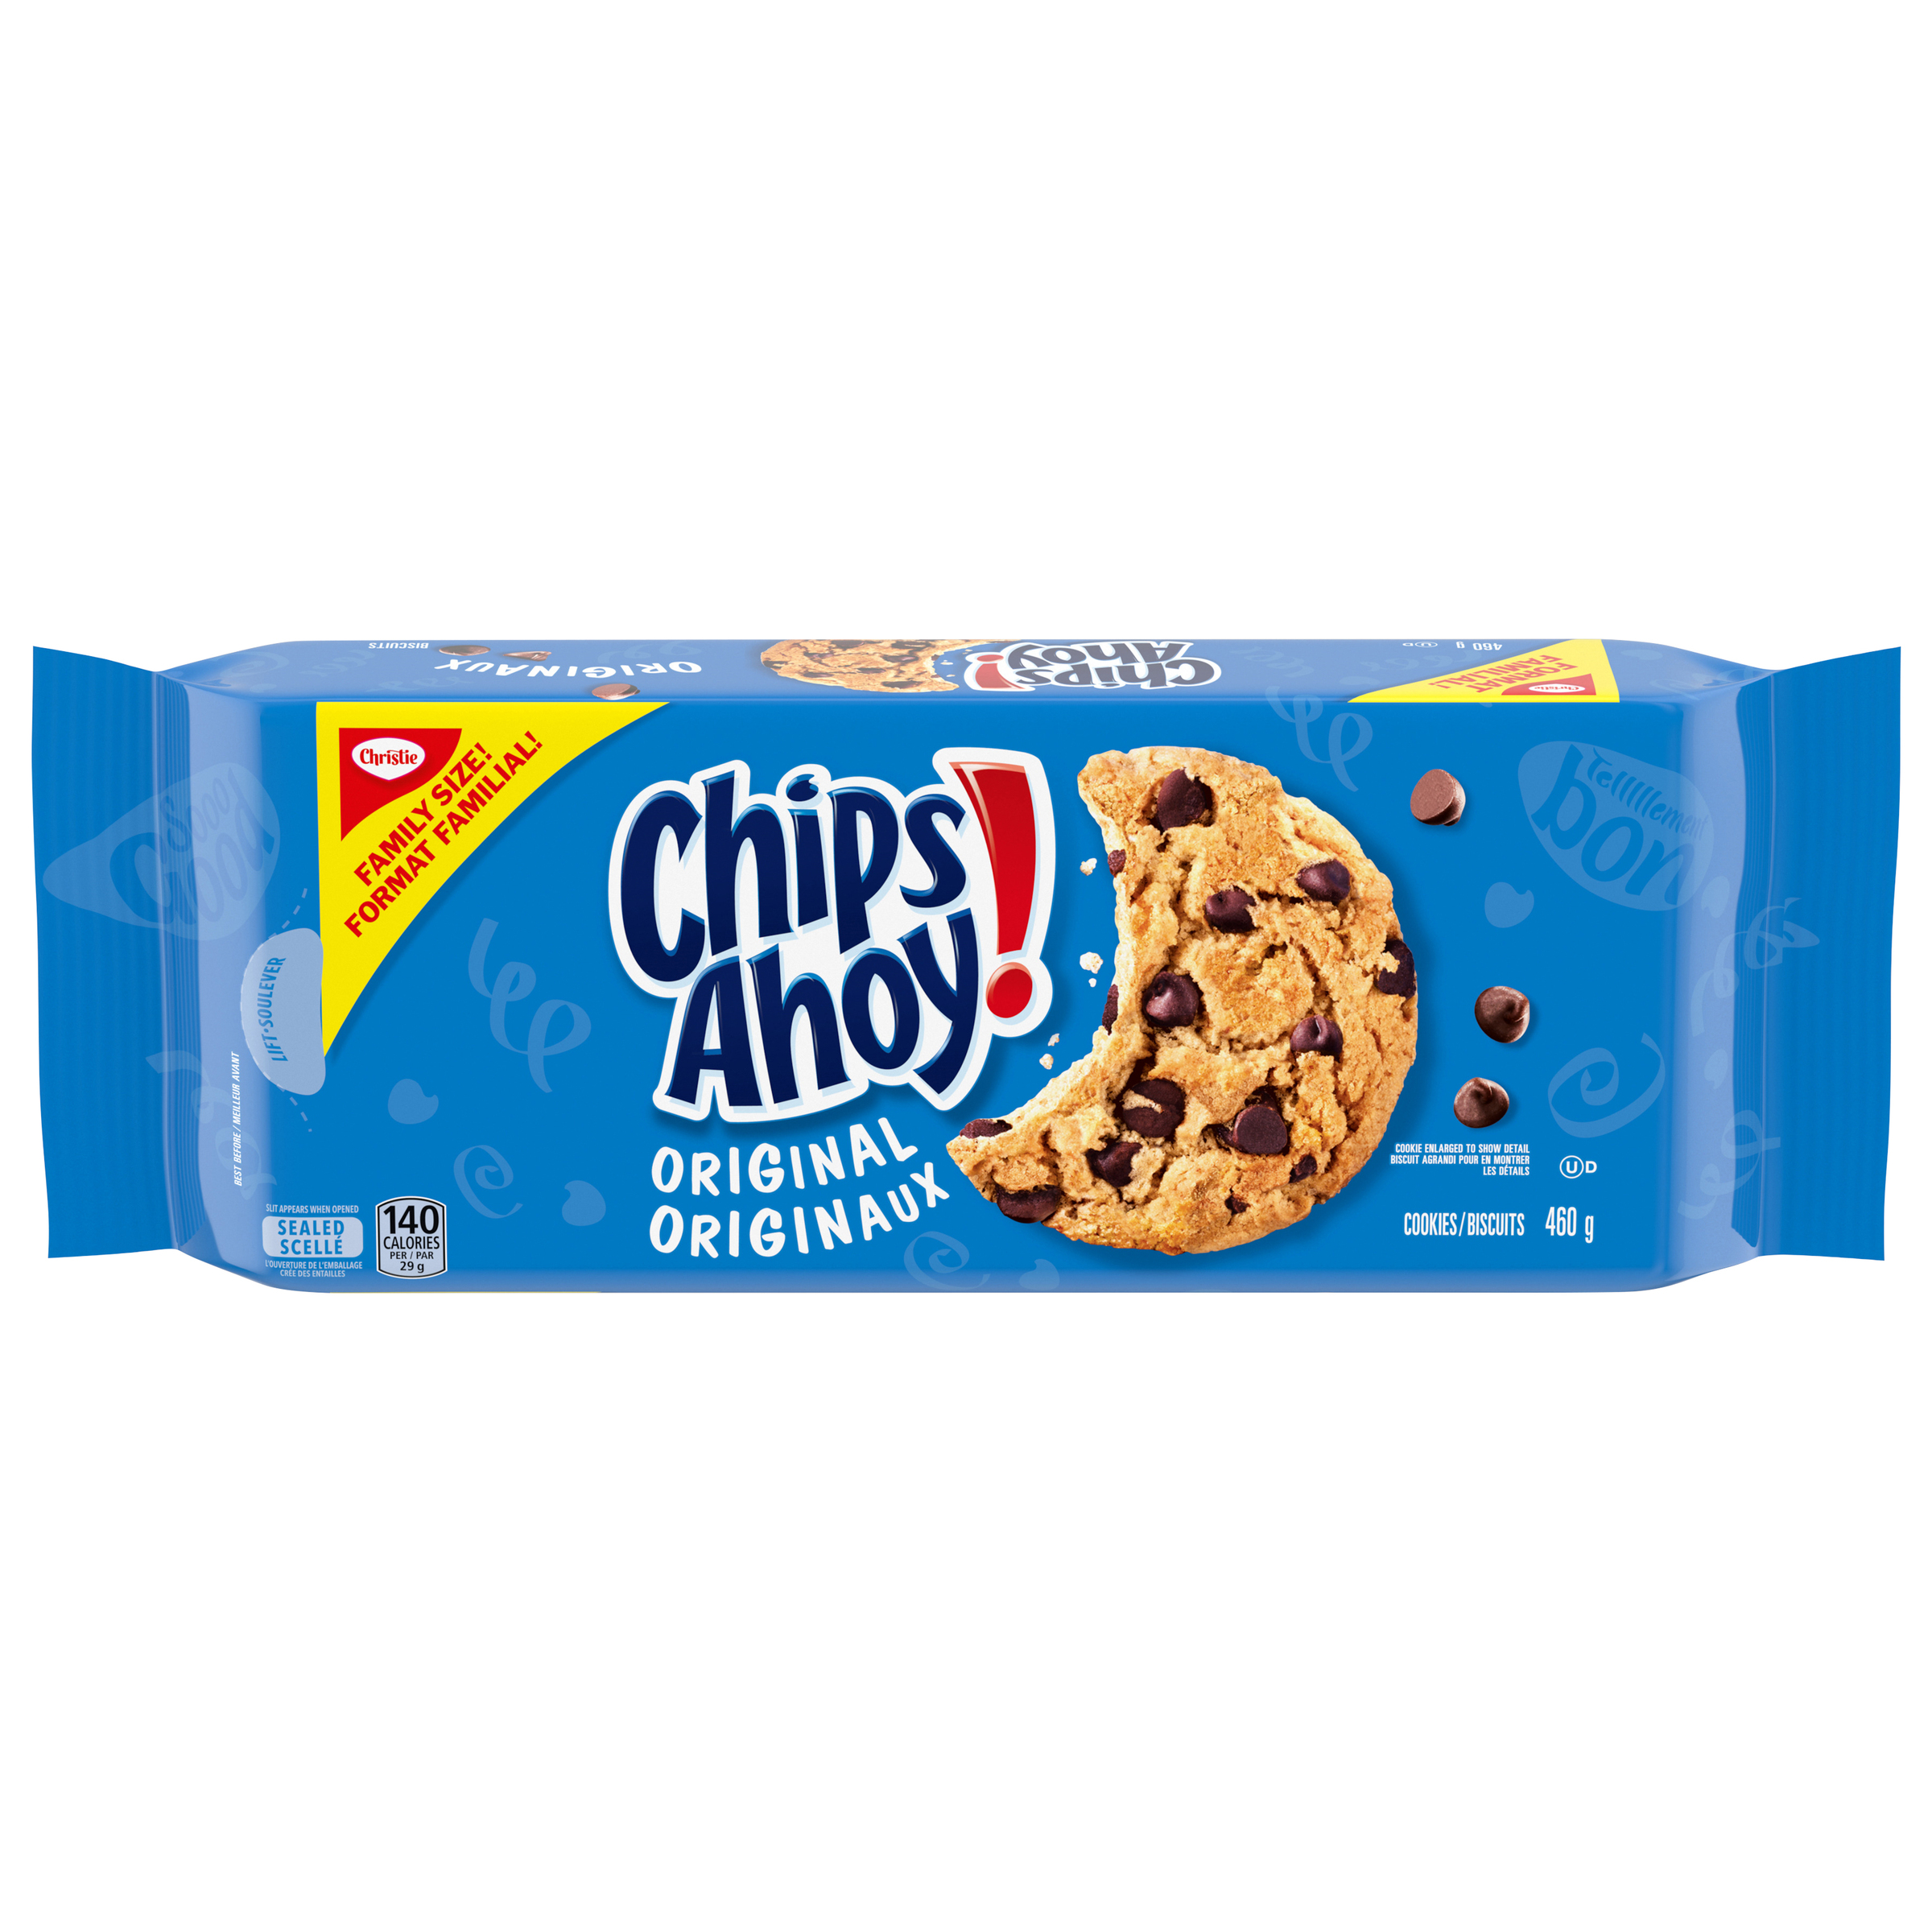 CHIPS AHOY! Original Chocolate Chip Cookies, 1 Family Size Resealable Pack (460g)